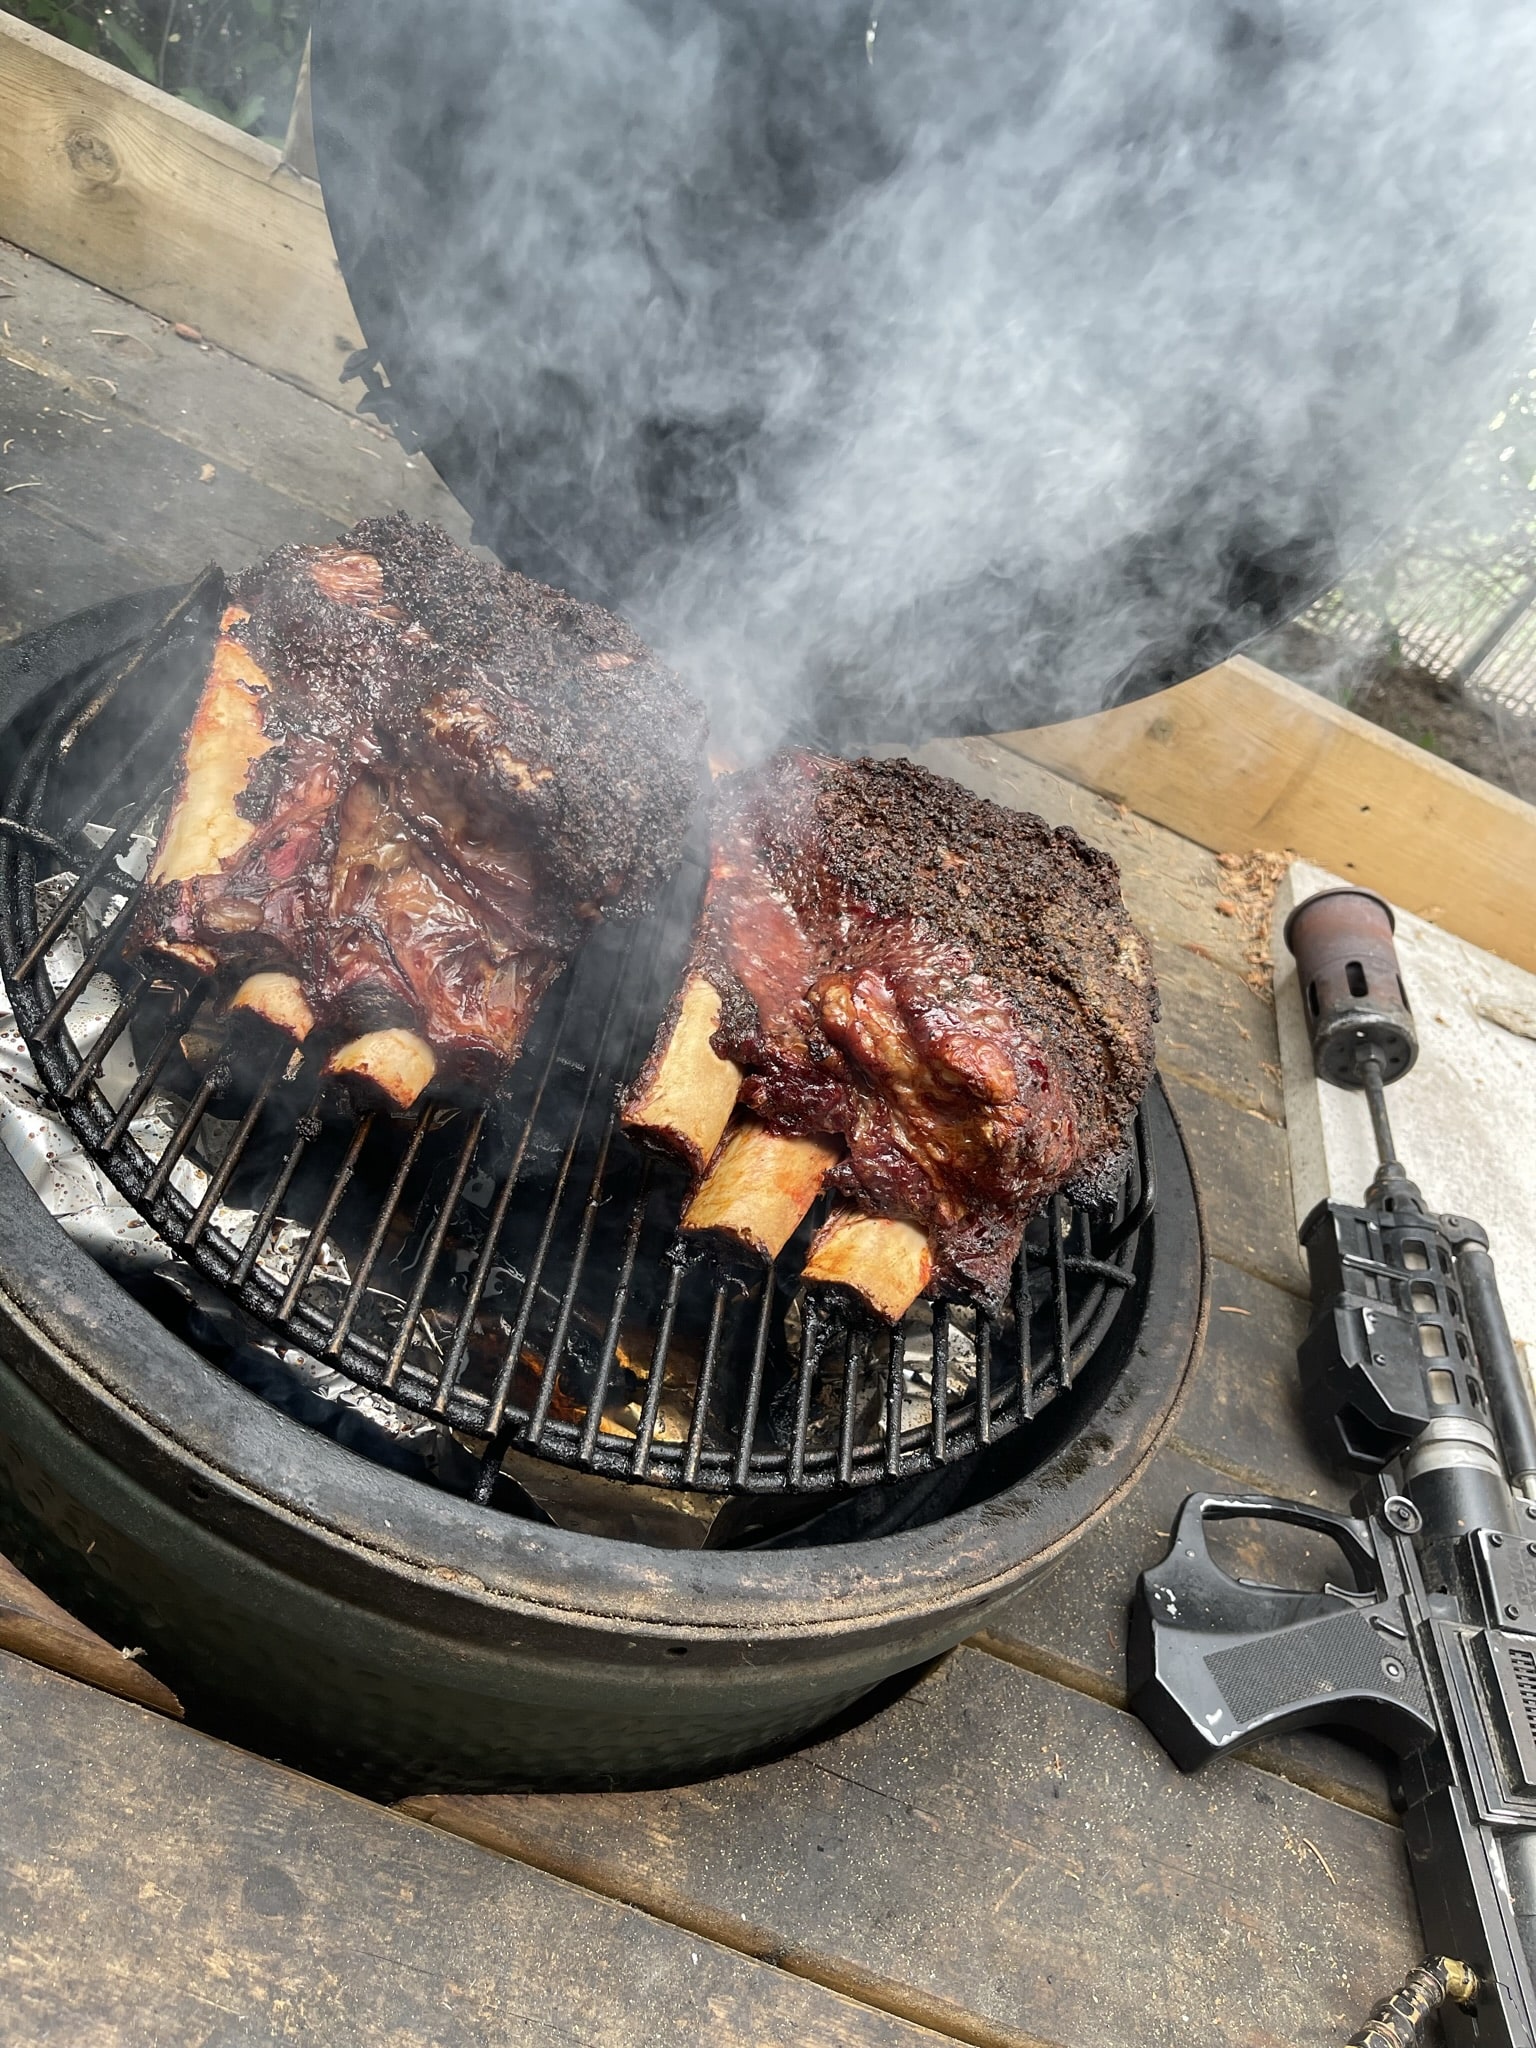 Darkside of the Grill - Ribs